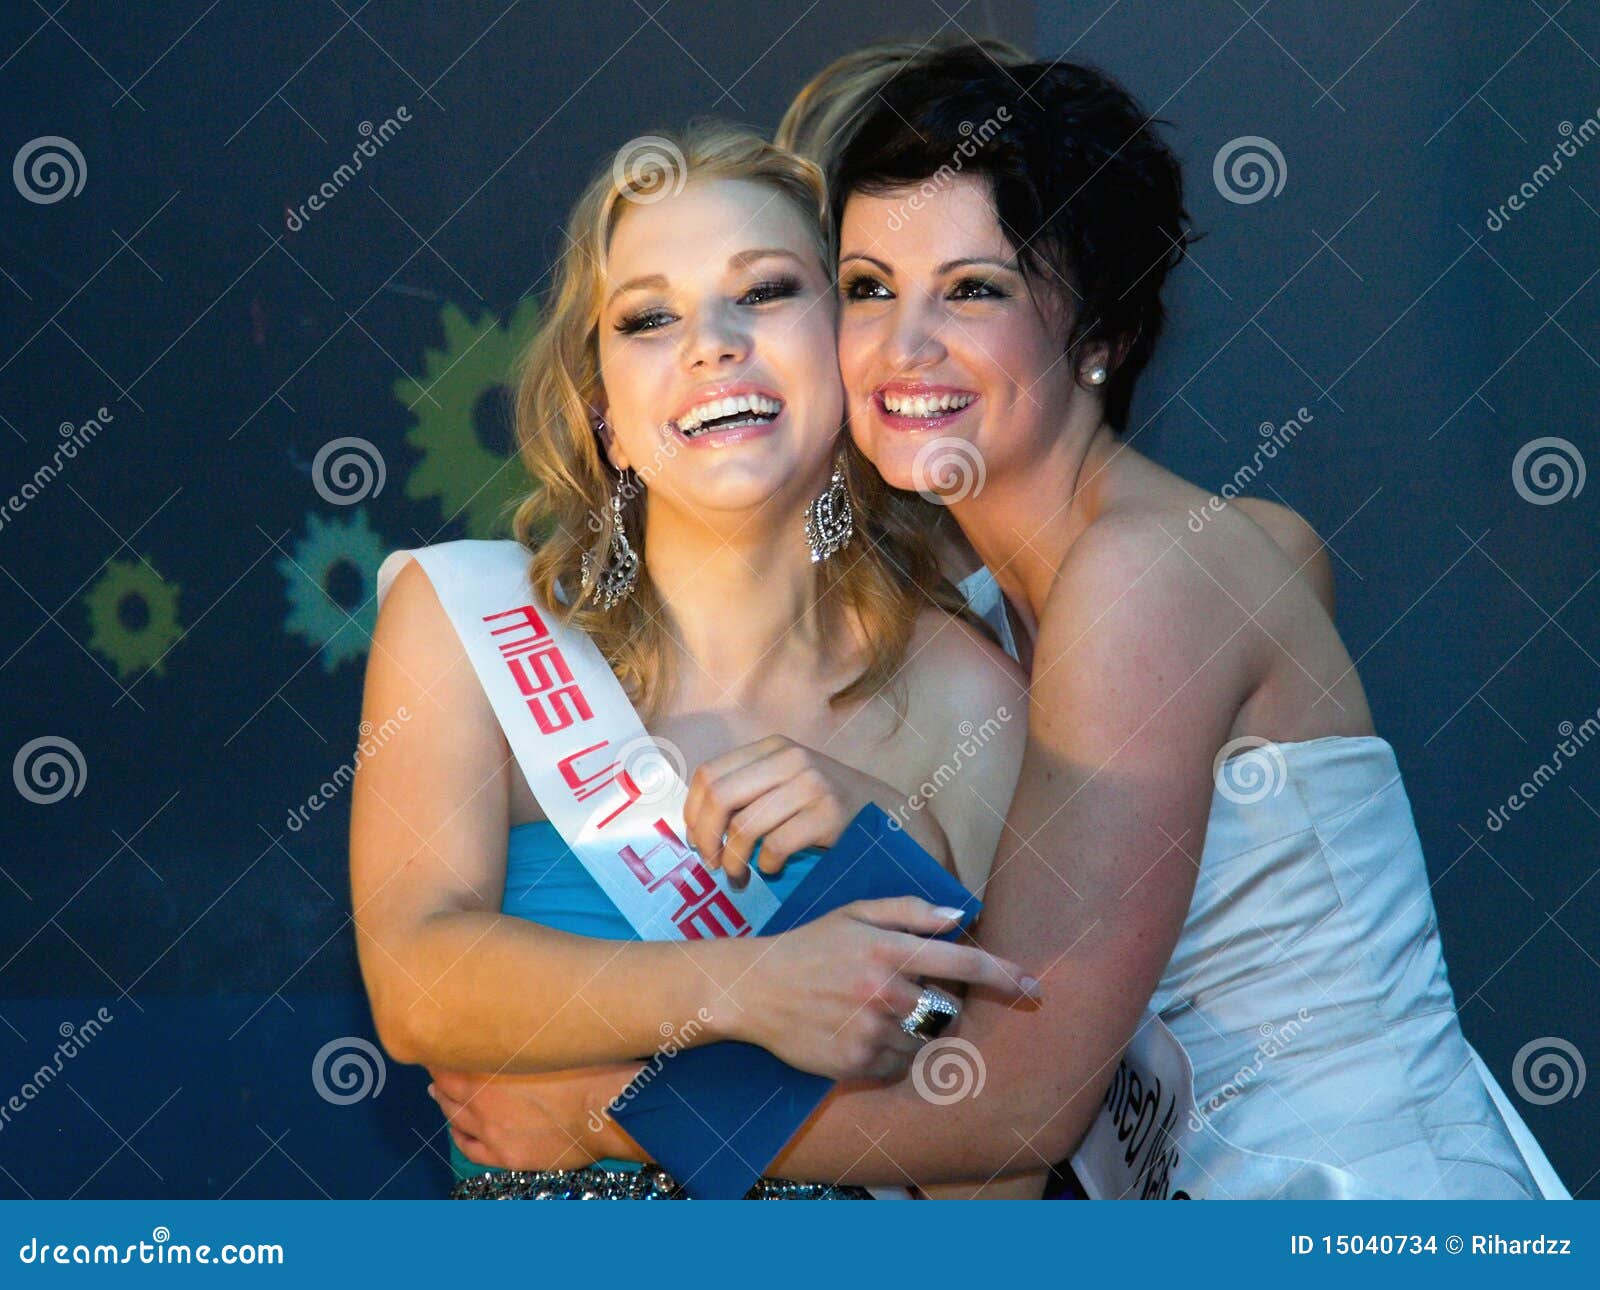 LIMERIK-JULY 2: Alice O Learly greeting Smantha Long a winner Miss United Nations Pageant Ireland in South Court Hotel, July 2, 2010 in Limerik, Ireland